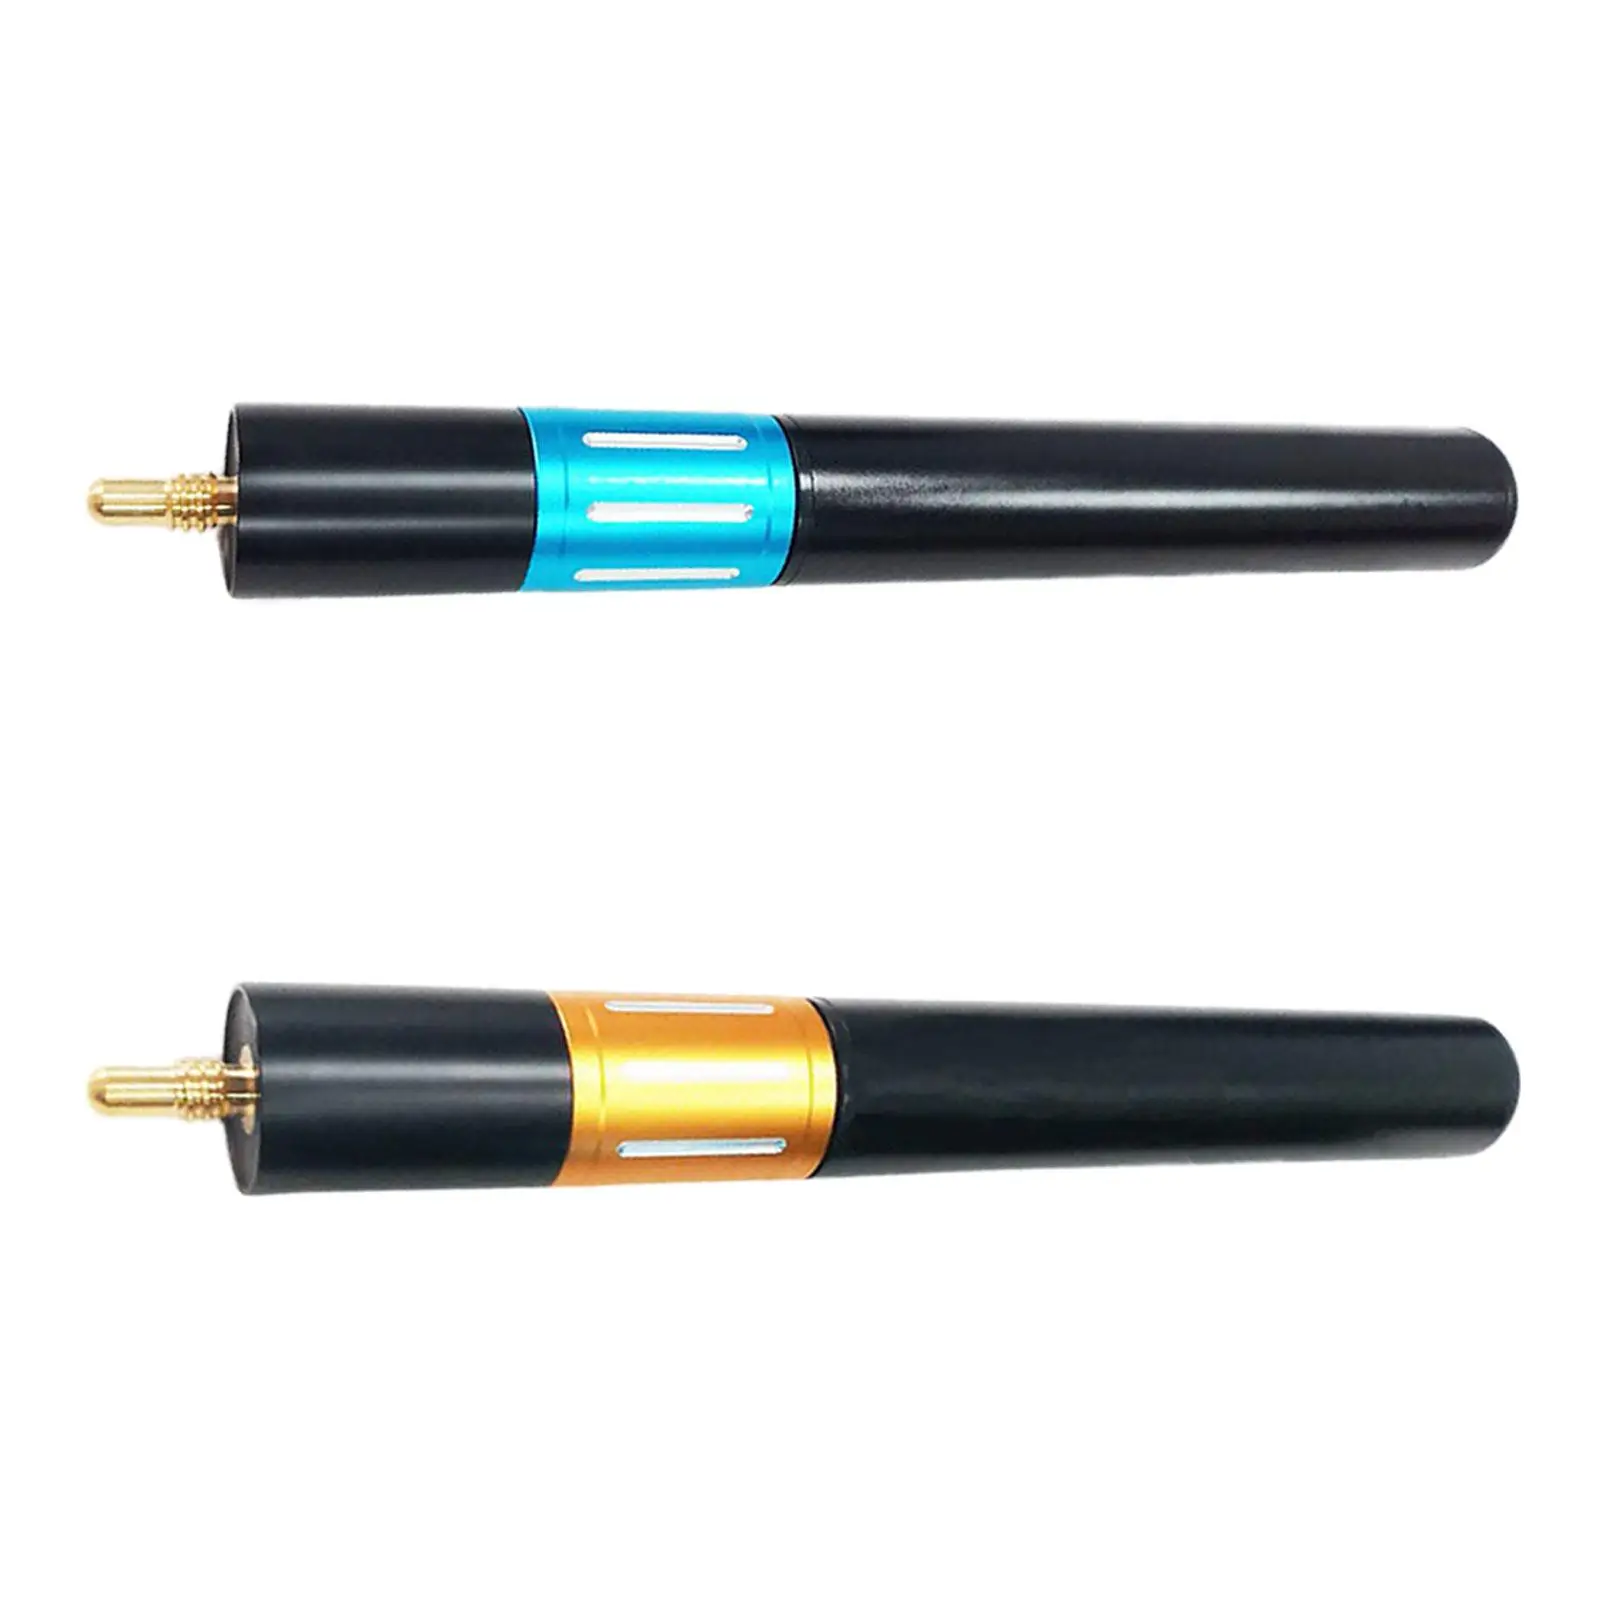 Pool Cue Extender Billiard Connect Shaft Cue Lengthener Billiards Pool Cue Extension for Games Player Athlete Trainer Accessory